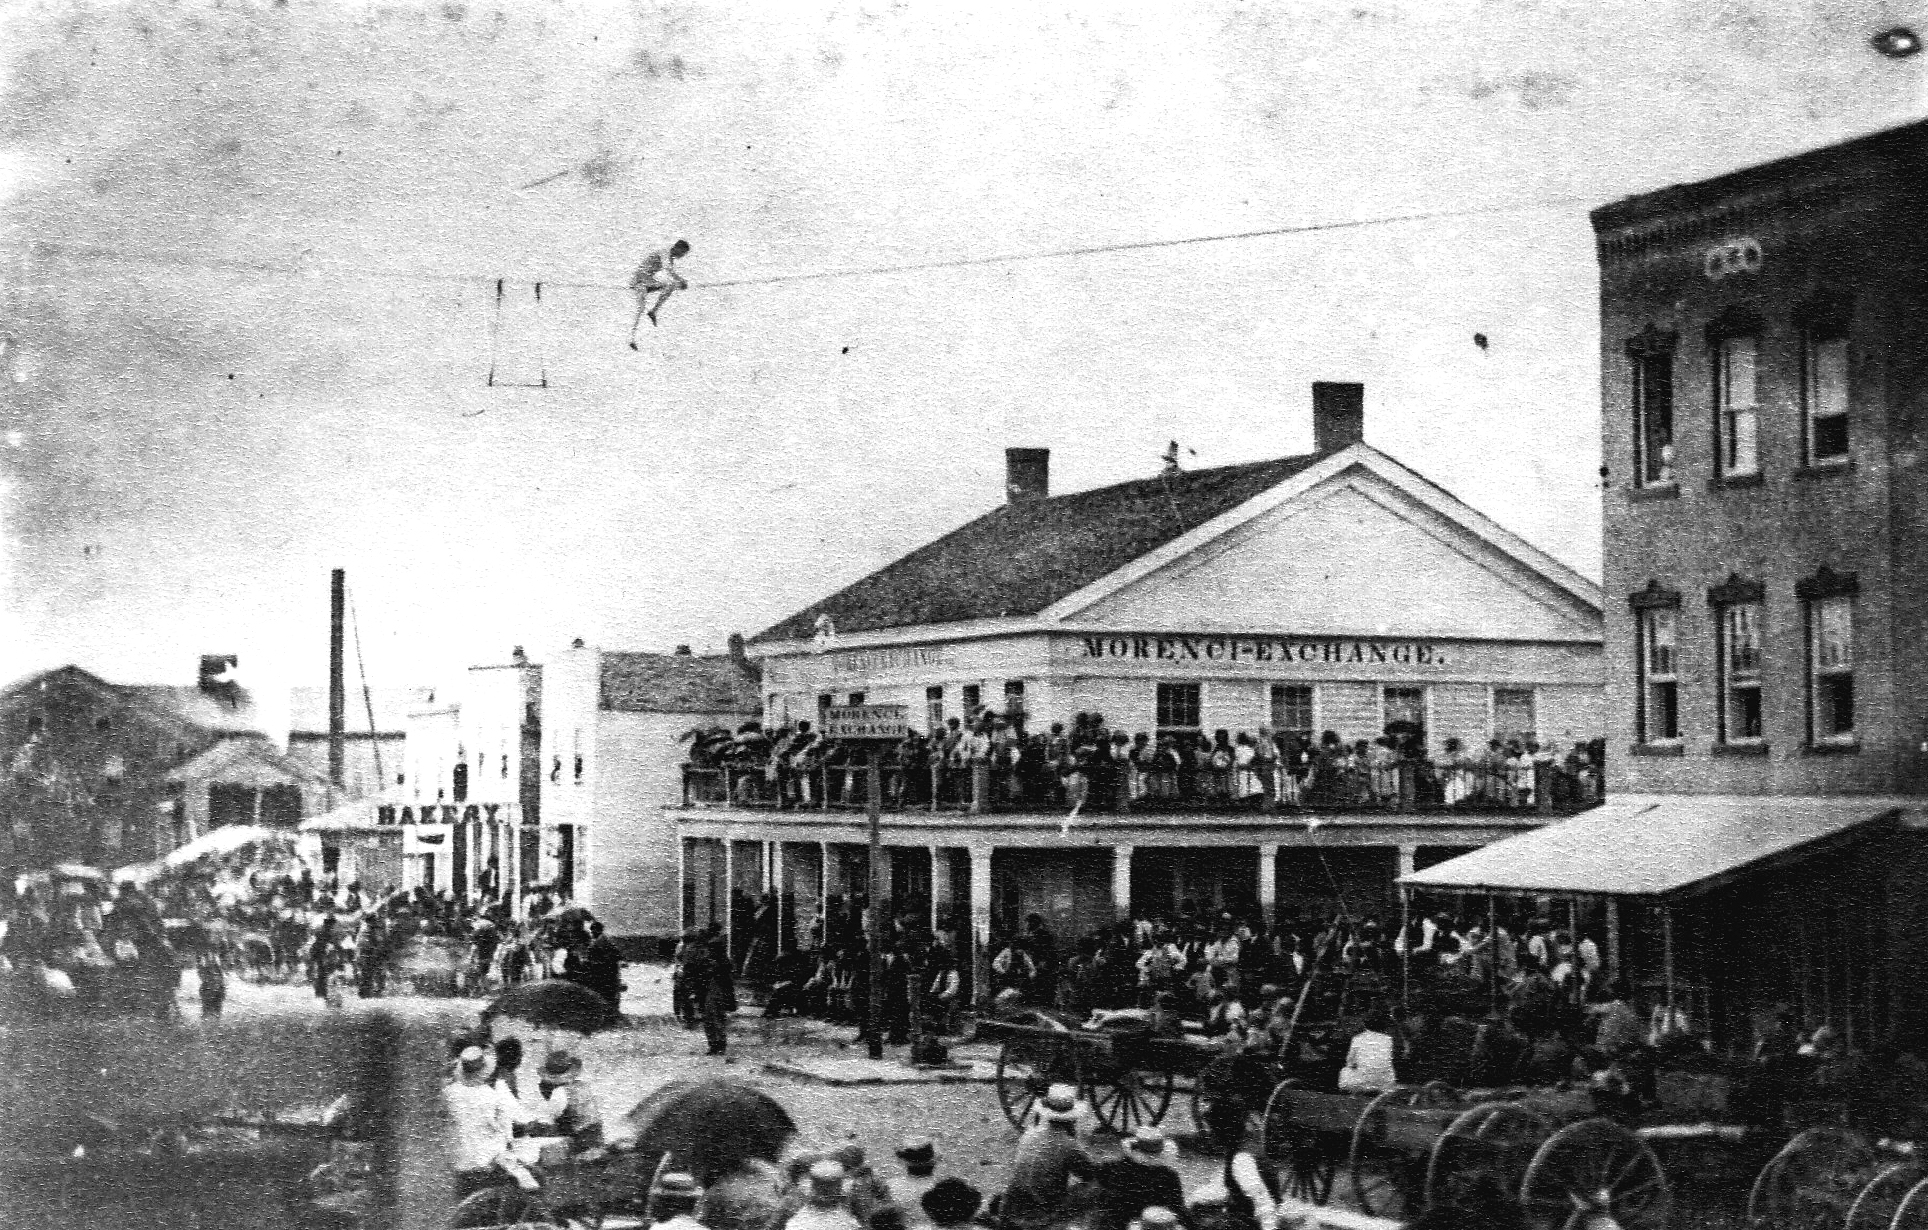 Centennial Celebration July 4, 1876 at corner of West Main and North Streets.  Abraham Babcock walking tight-wire from Rorick’s Hardware (Bank Bldg. site) to former Mace Bldg. N.E. corner.  Morenci Exchange sign and village pump in street.  Bakery and the grist mill in distance.